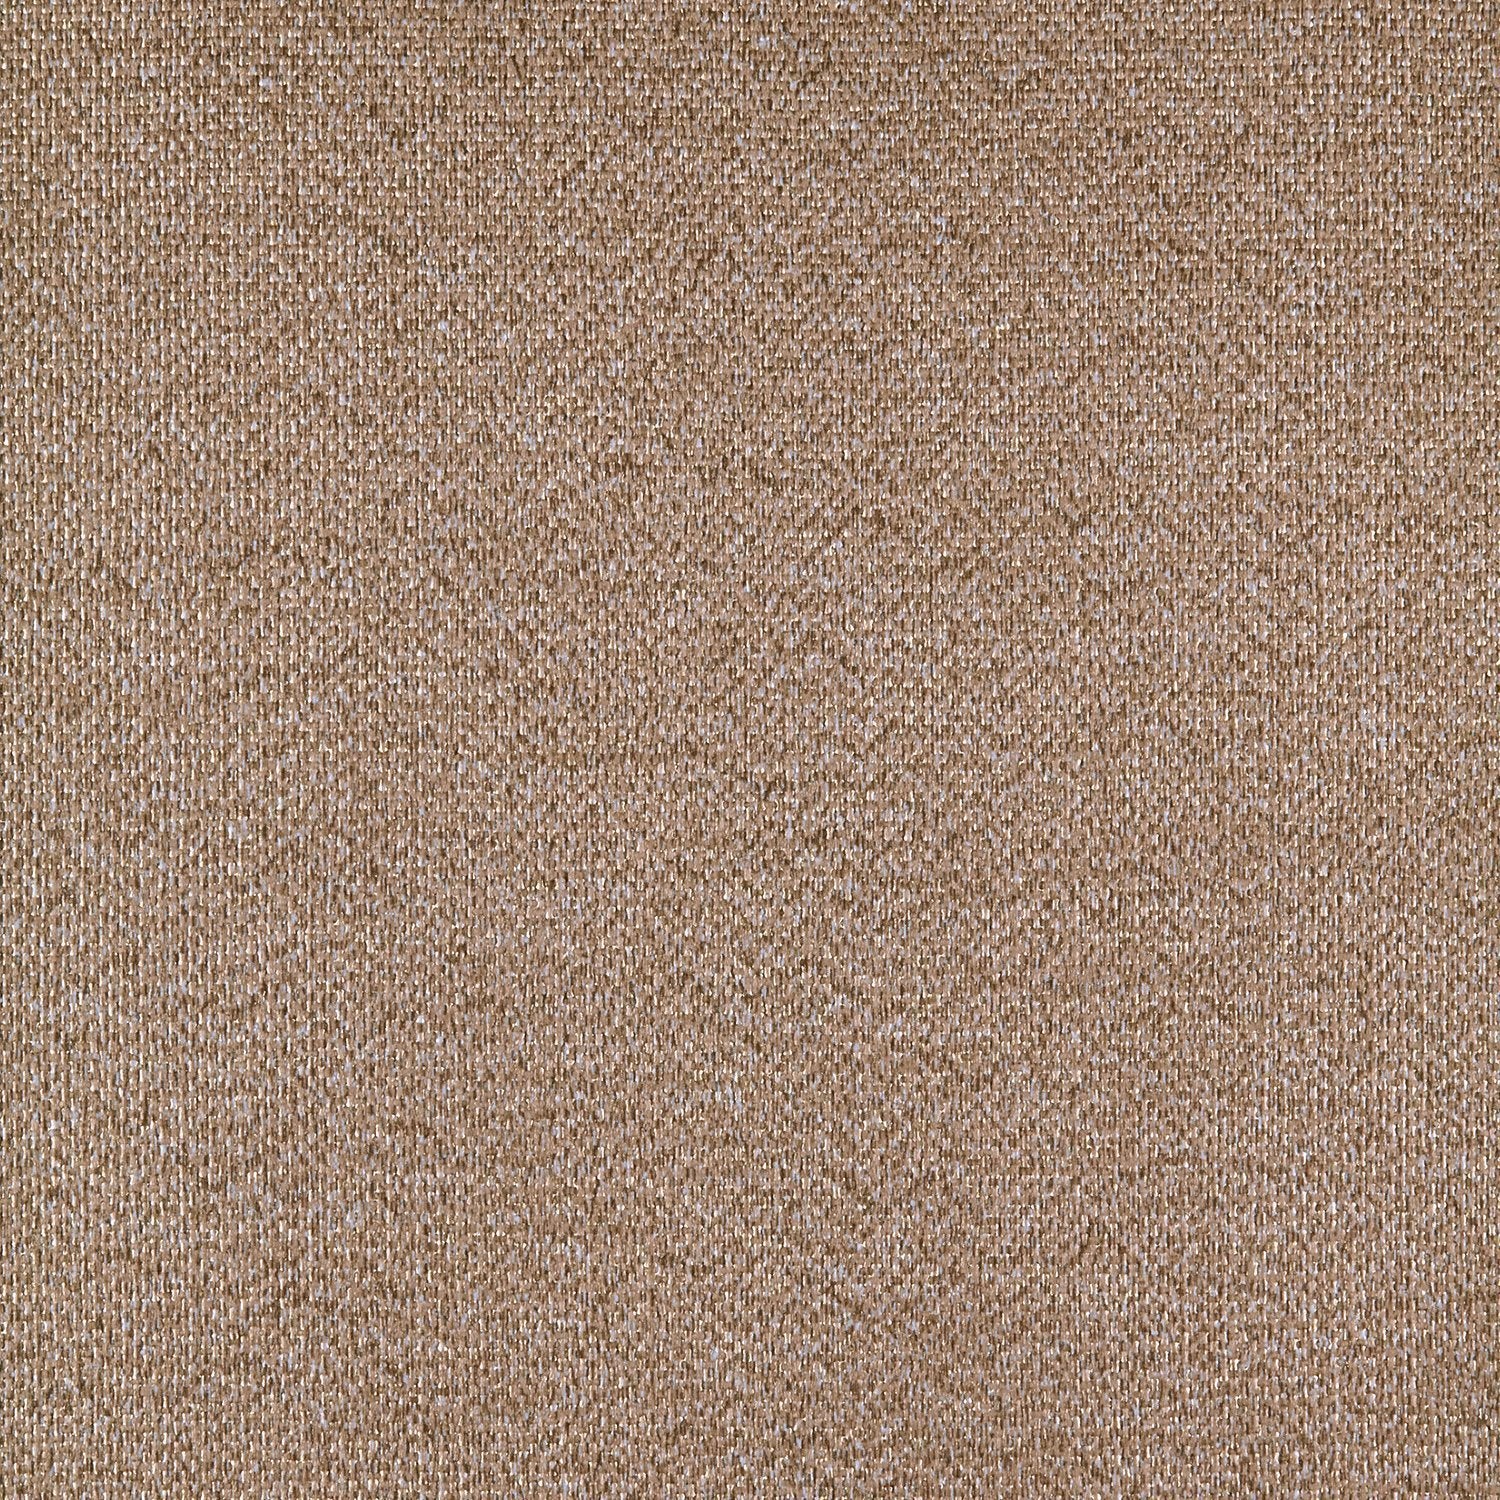 Tweed - Y46935 - Wallcovering - Vycon - Kube Contract